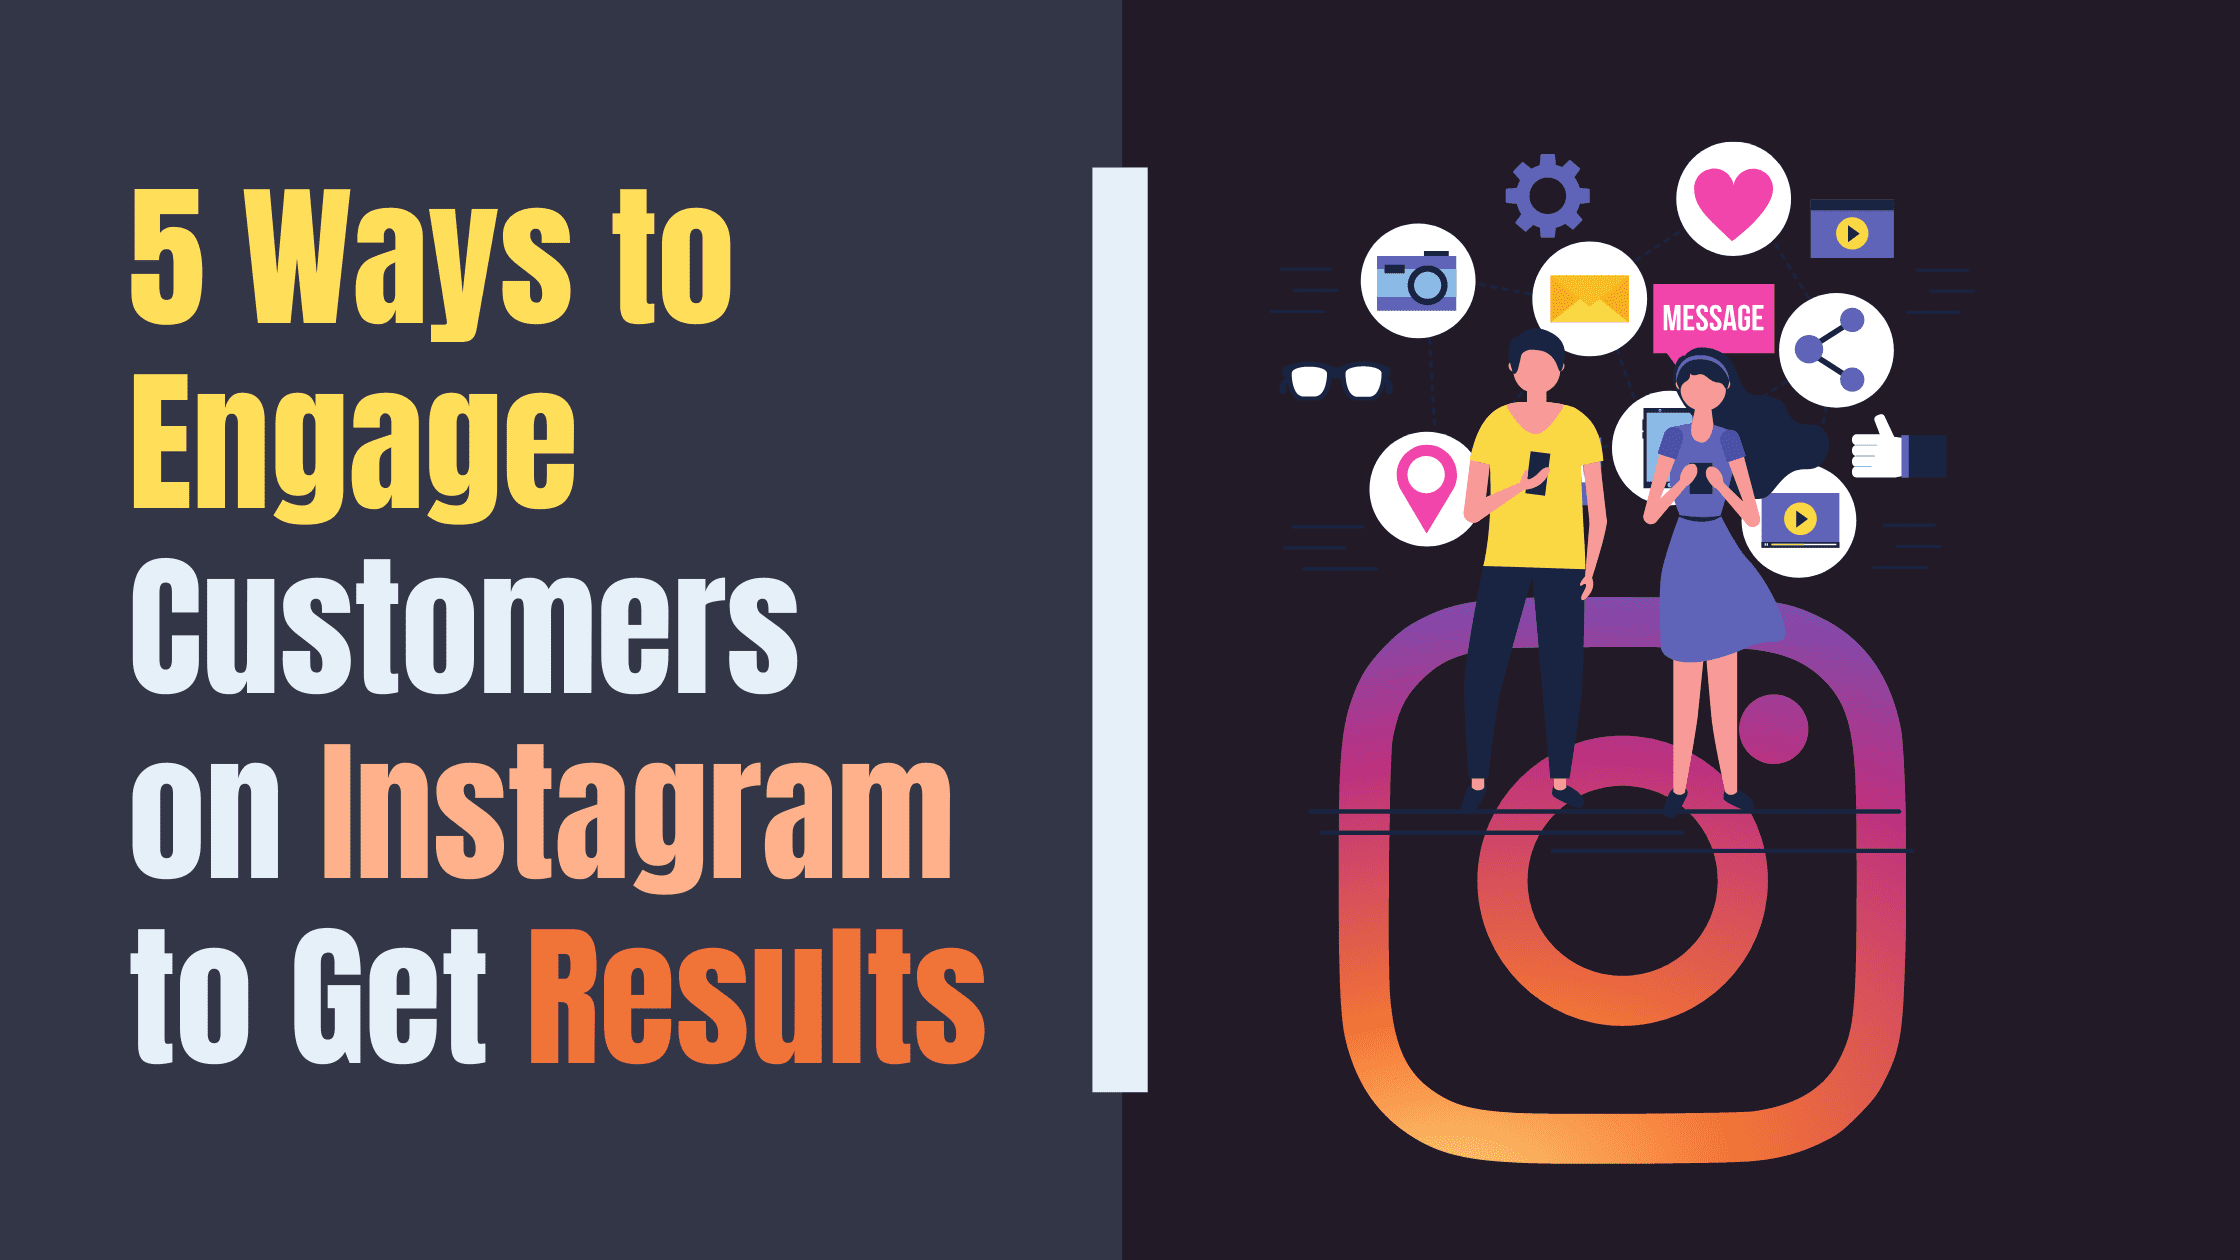 5 Ways to Engage Customers on Instagram to Get Results